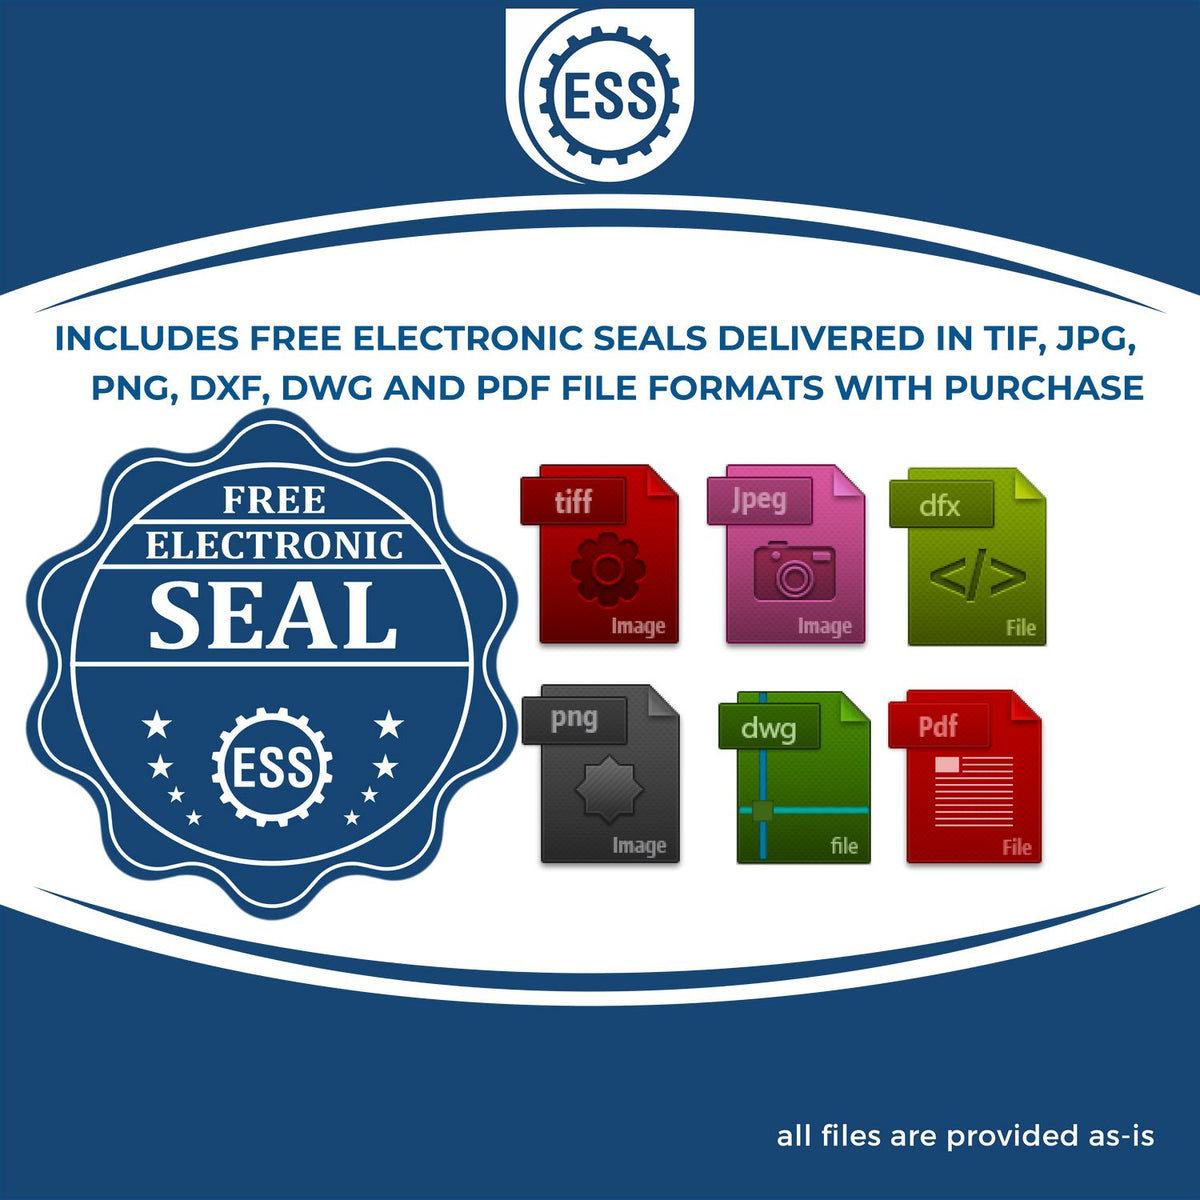 An infographic for the free electronic seal for the PSI Colorado Notary Stamp illustrating the different file type icons such as DXF, DWG, TIF, JPG and PNG.